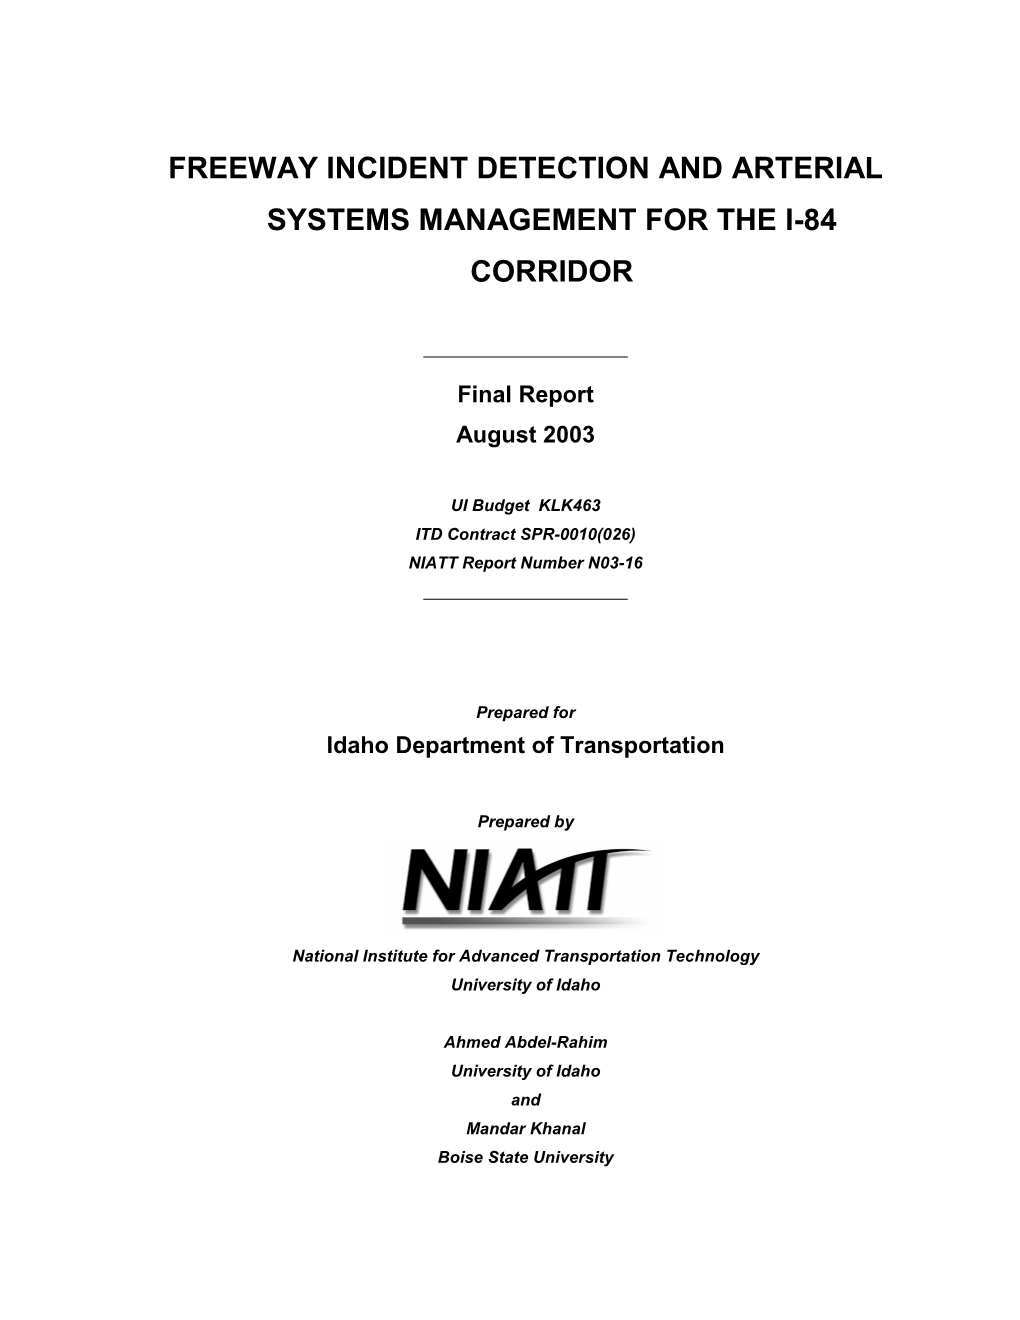 Freeway Incident Detection and Arterial Systems Management for the I-84 Corridor